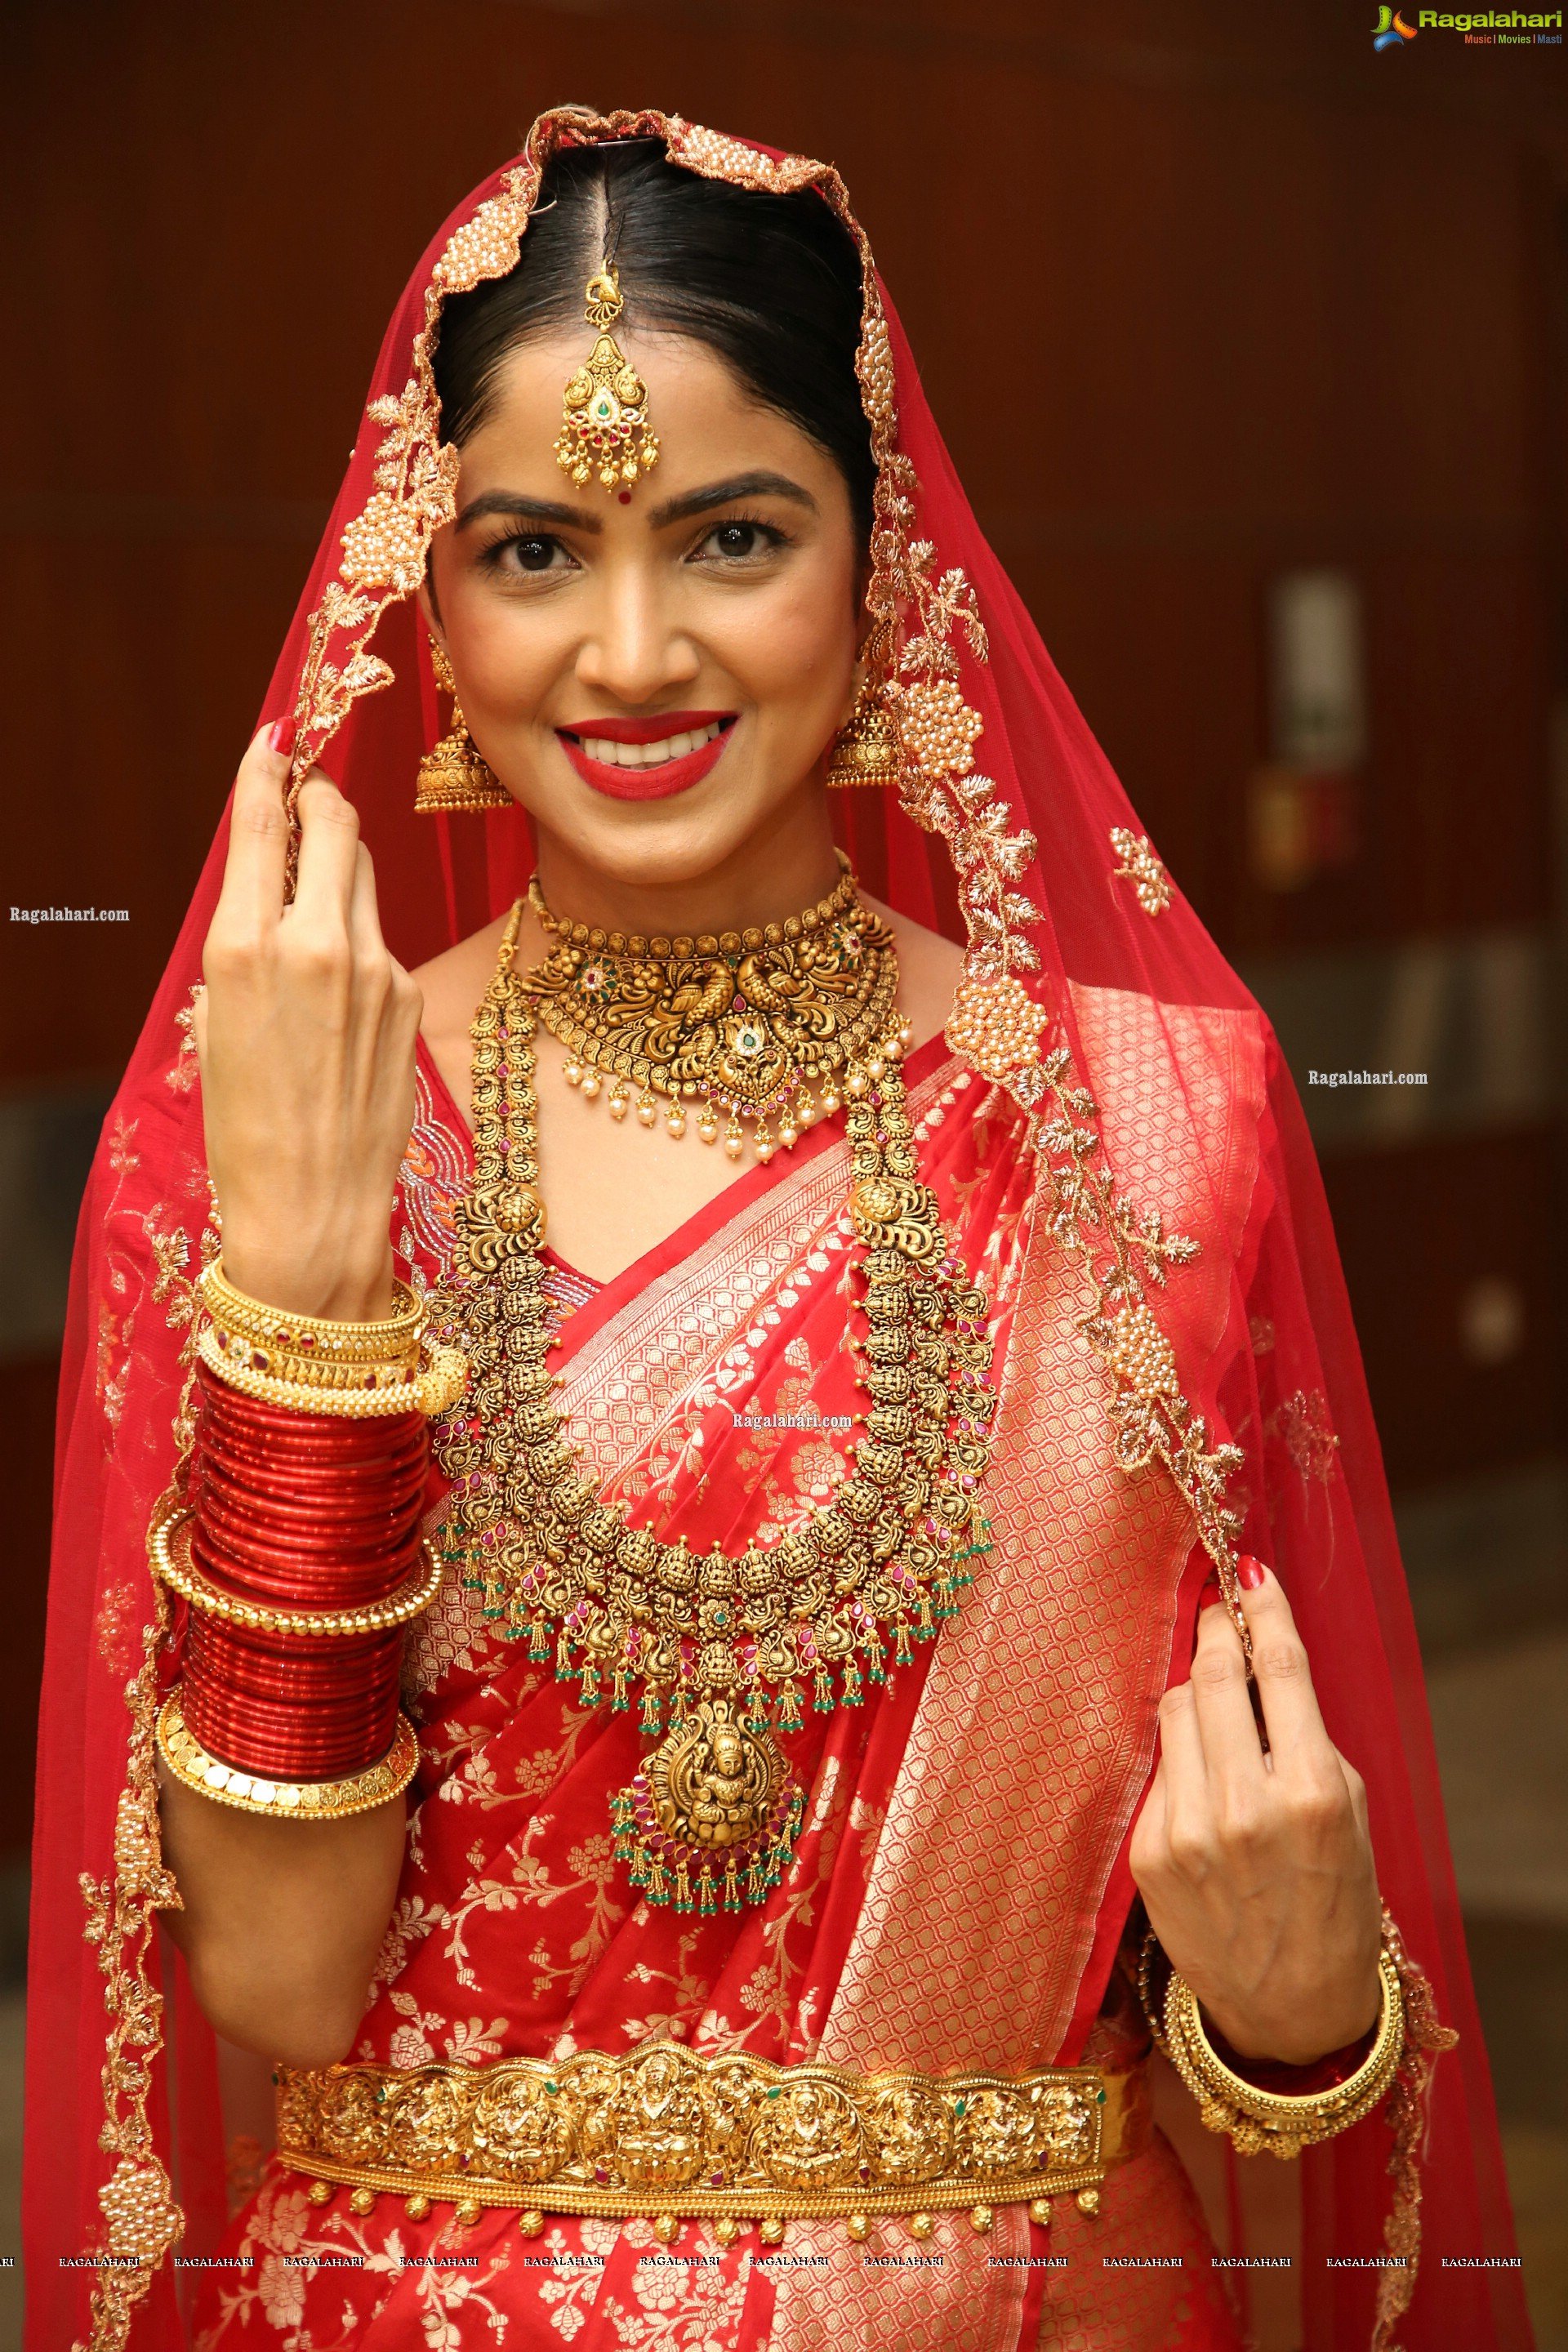 Drishika Chander in Bridal Red and Stunning Ornaments, HD Photo Gallery